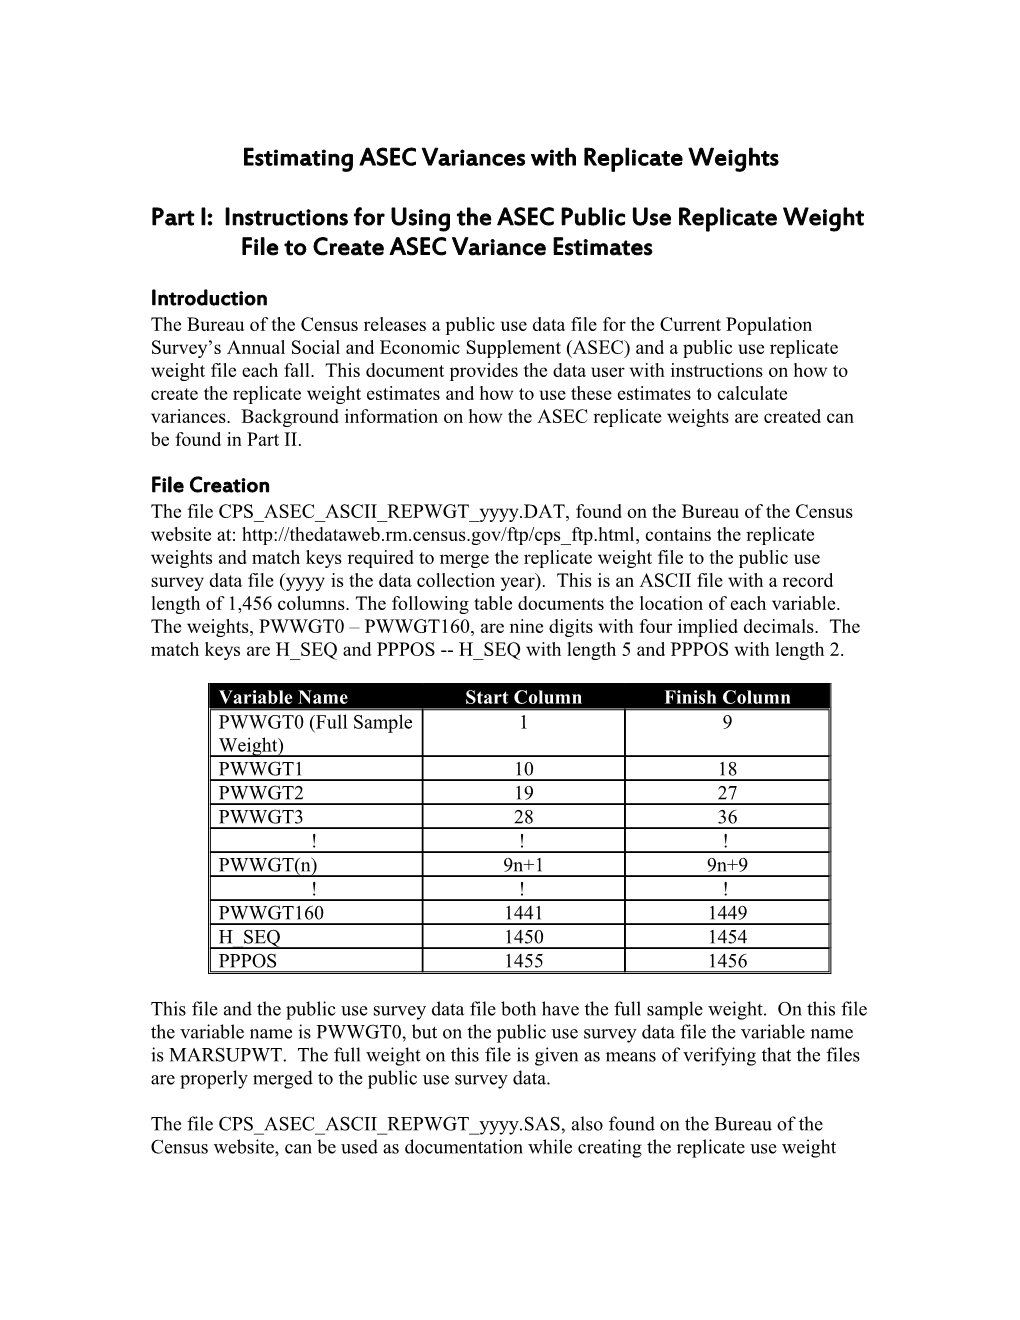 Use of the Public Use Replicate Weight File